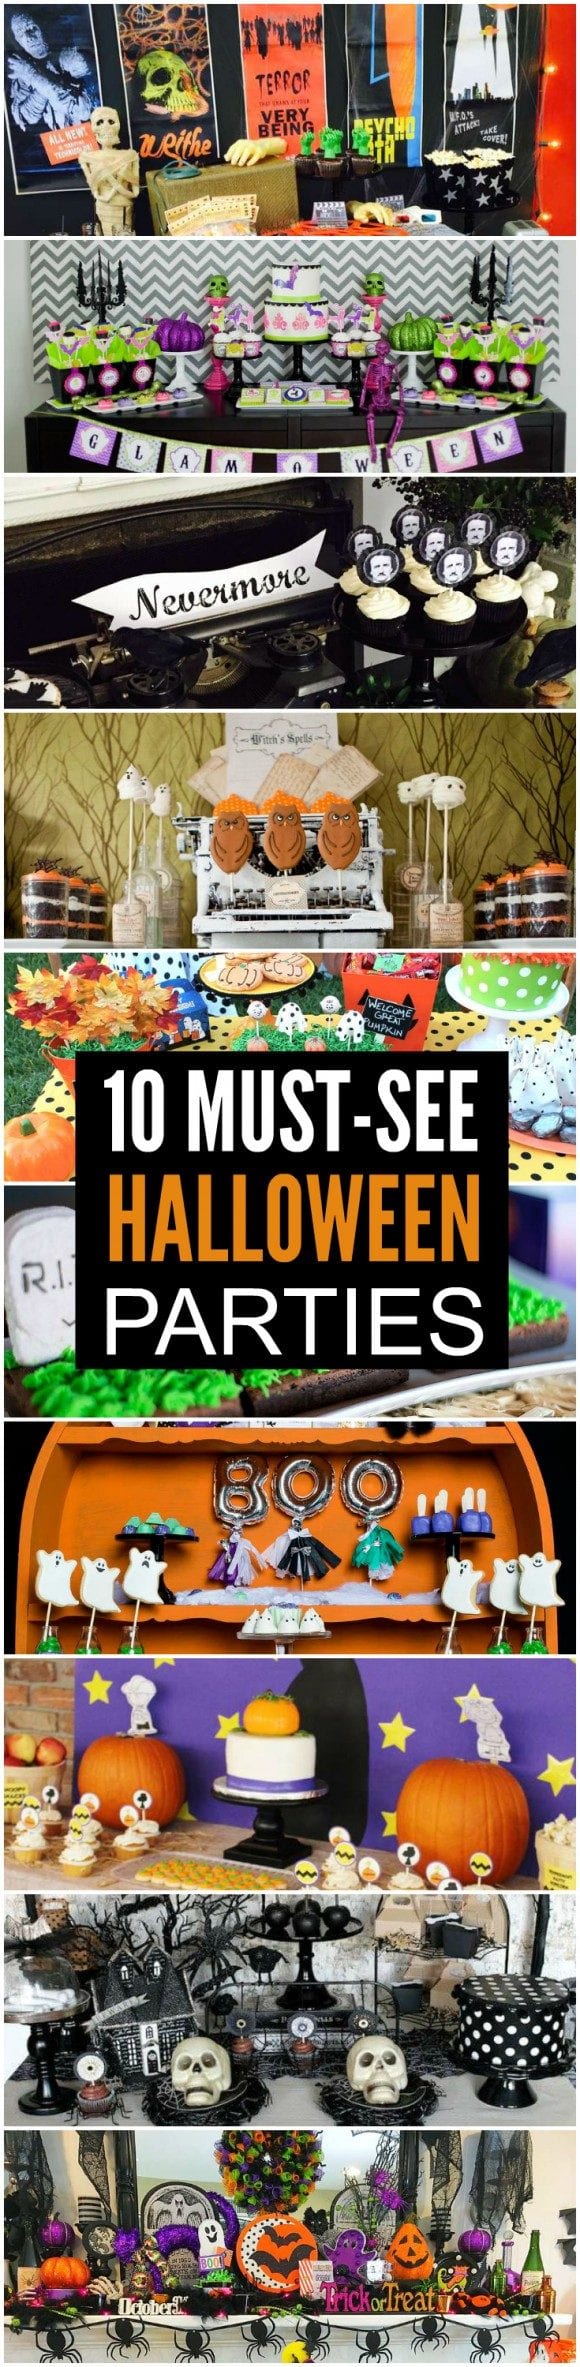 10 Must See Halloween Parties | CatchMyParty.com